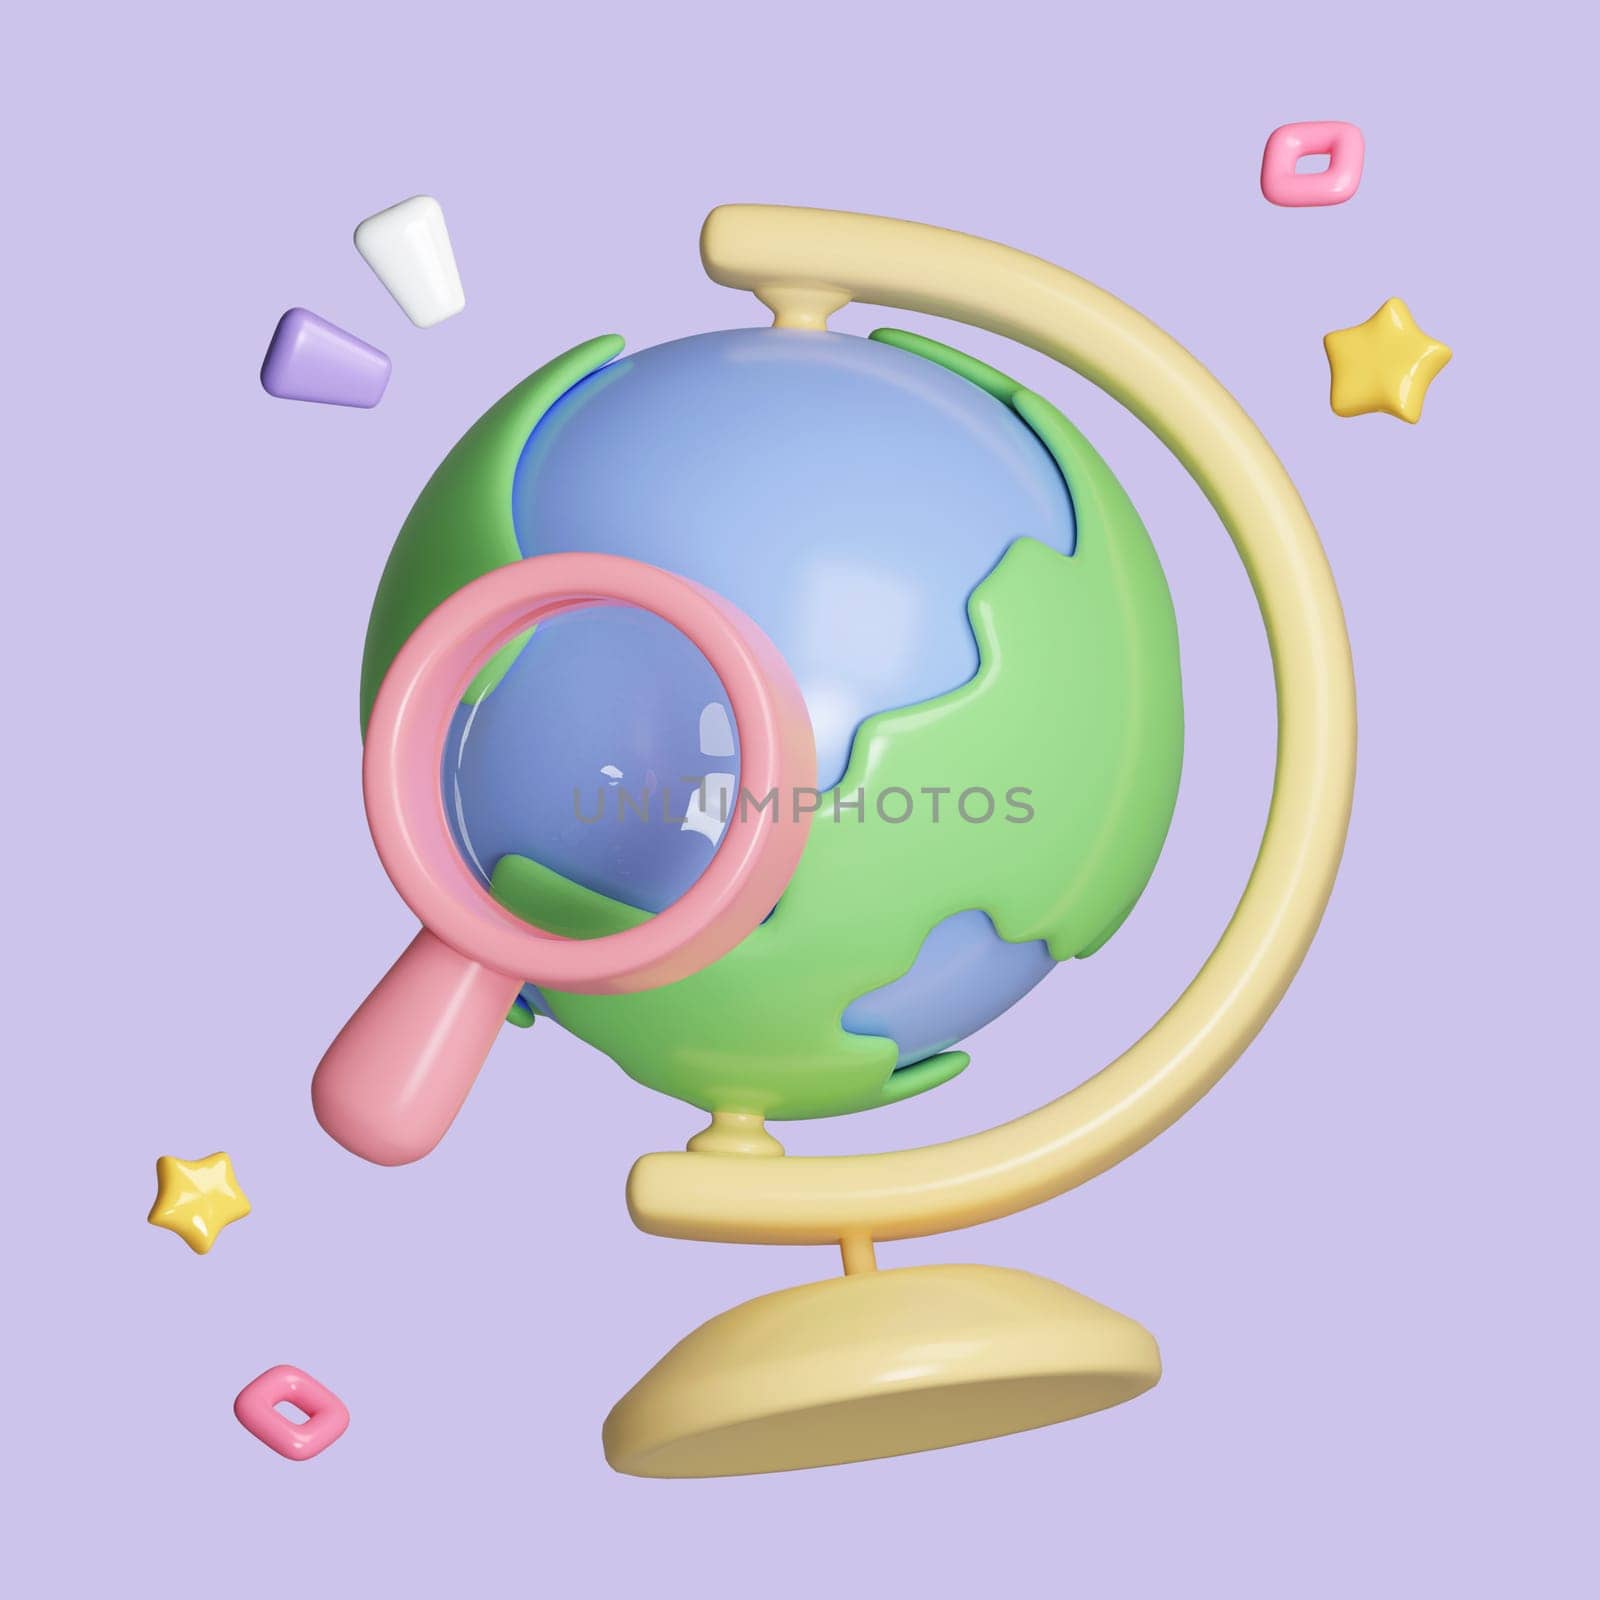 Cartoon Earth globe and magnifying glass searching concept. Planet Earth model with world map on base isolated on pastel background. 3d render illustration by meepiangraphic